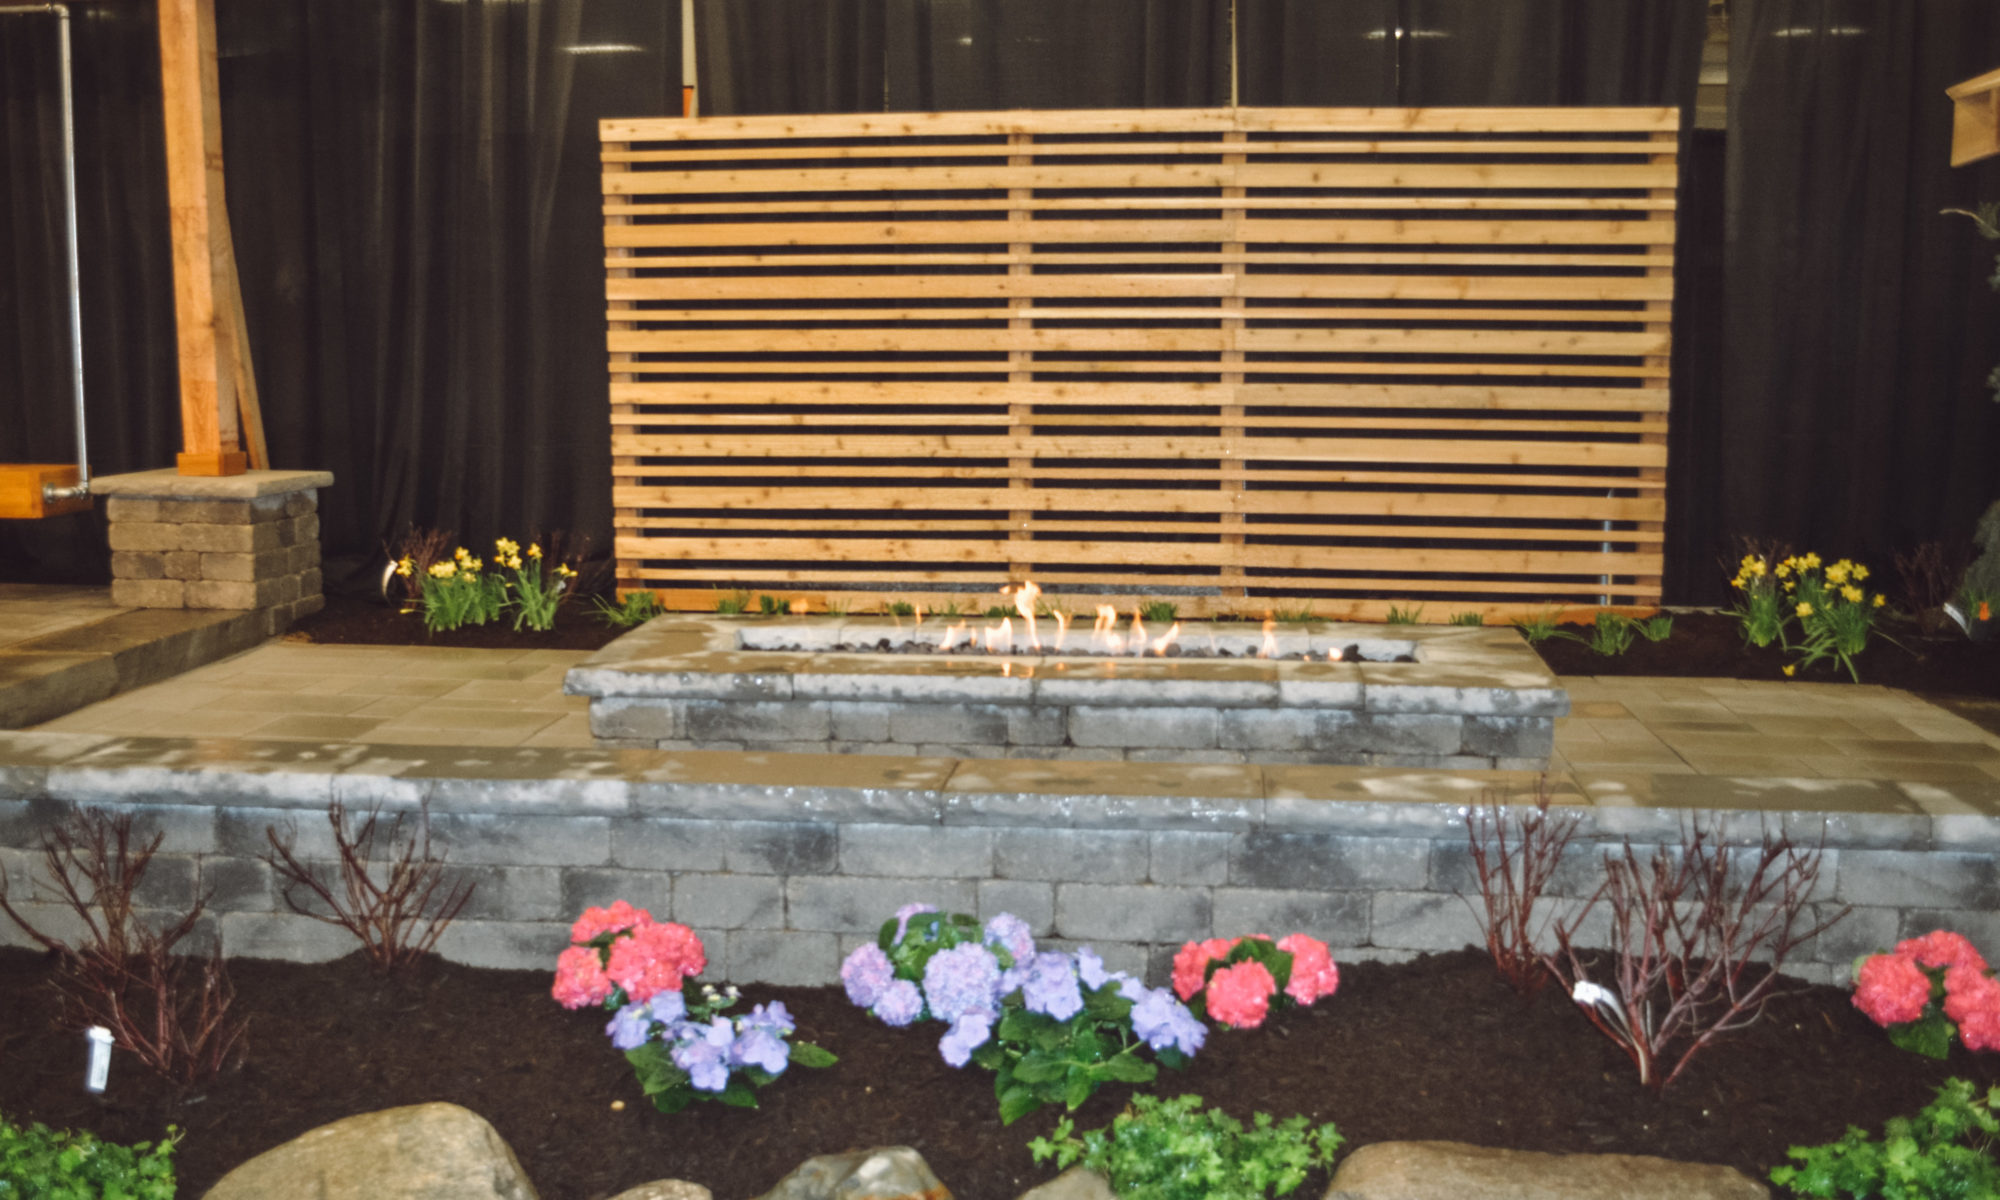 precision outdoors flower and patio show 2020 pergola fire pit swing screen wall outdoor kitchen living grill